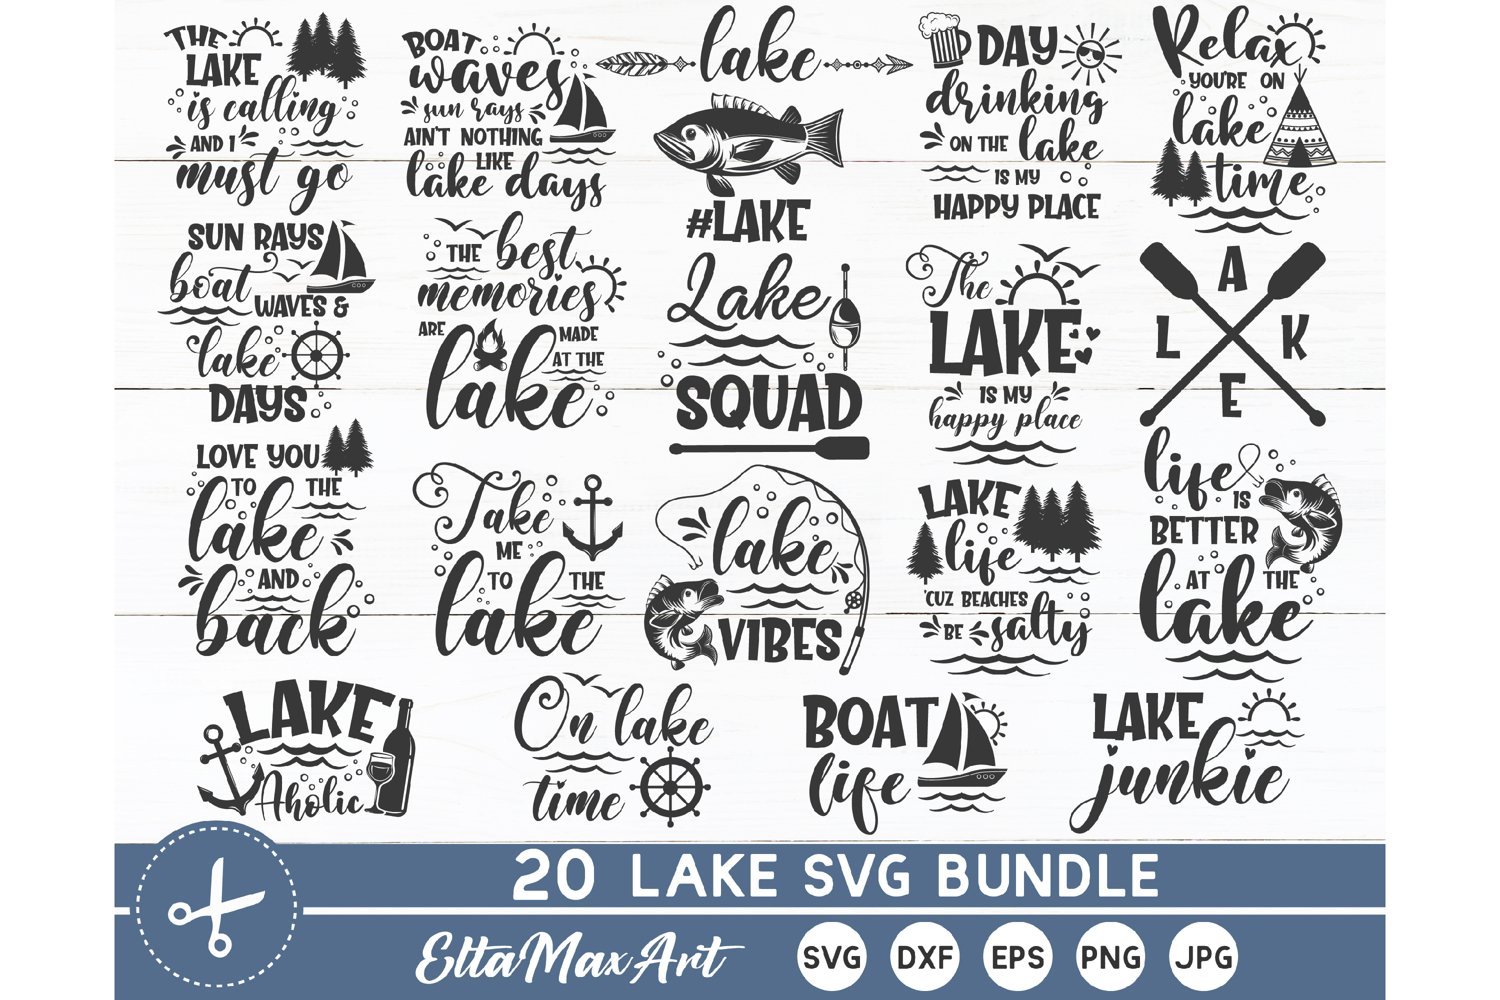 This set includes 20 Lake SCG Quotes.